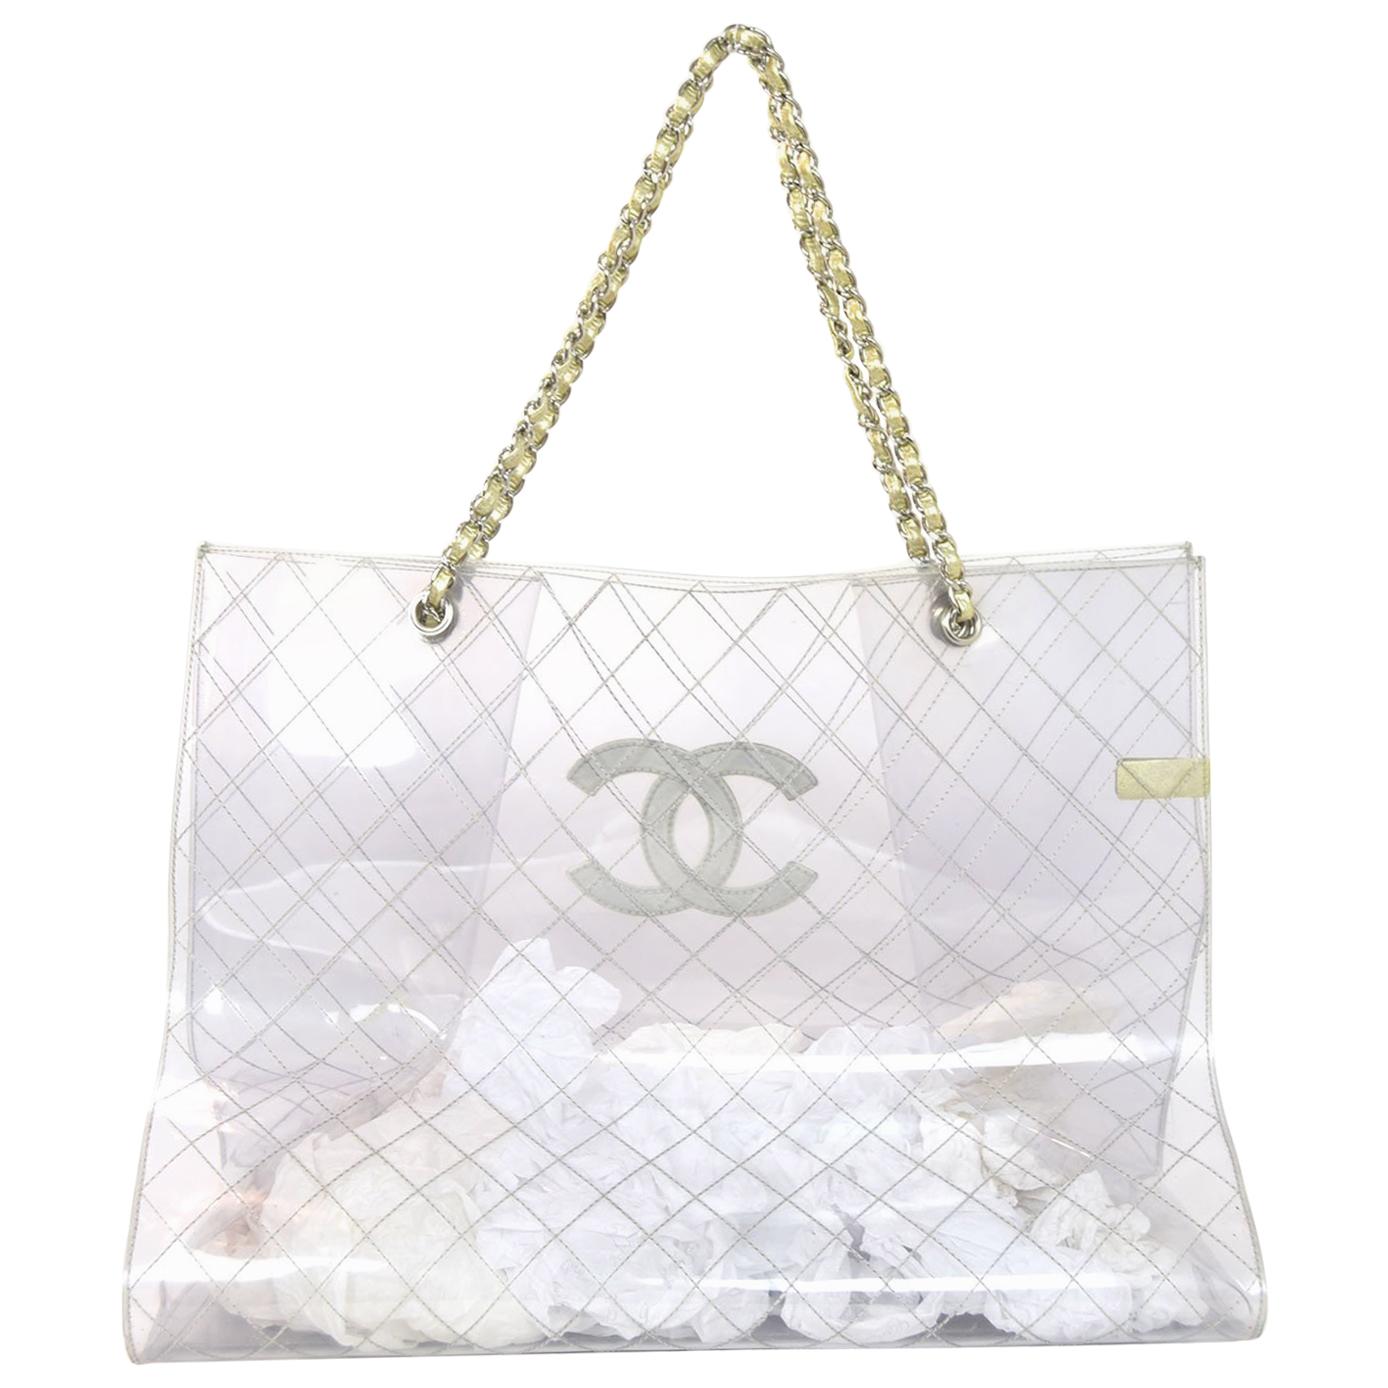 Chanel Rare Vintage 1990s Xxxl Oversized See Through Naked Gold Accent Pvc  Tote